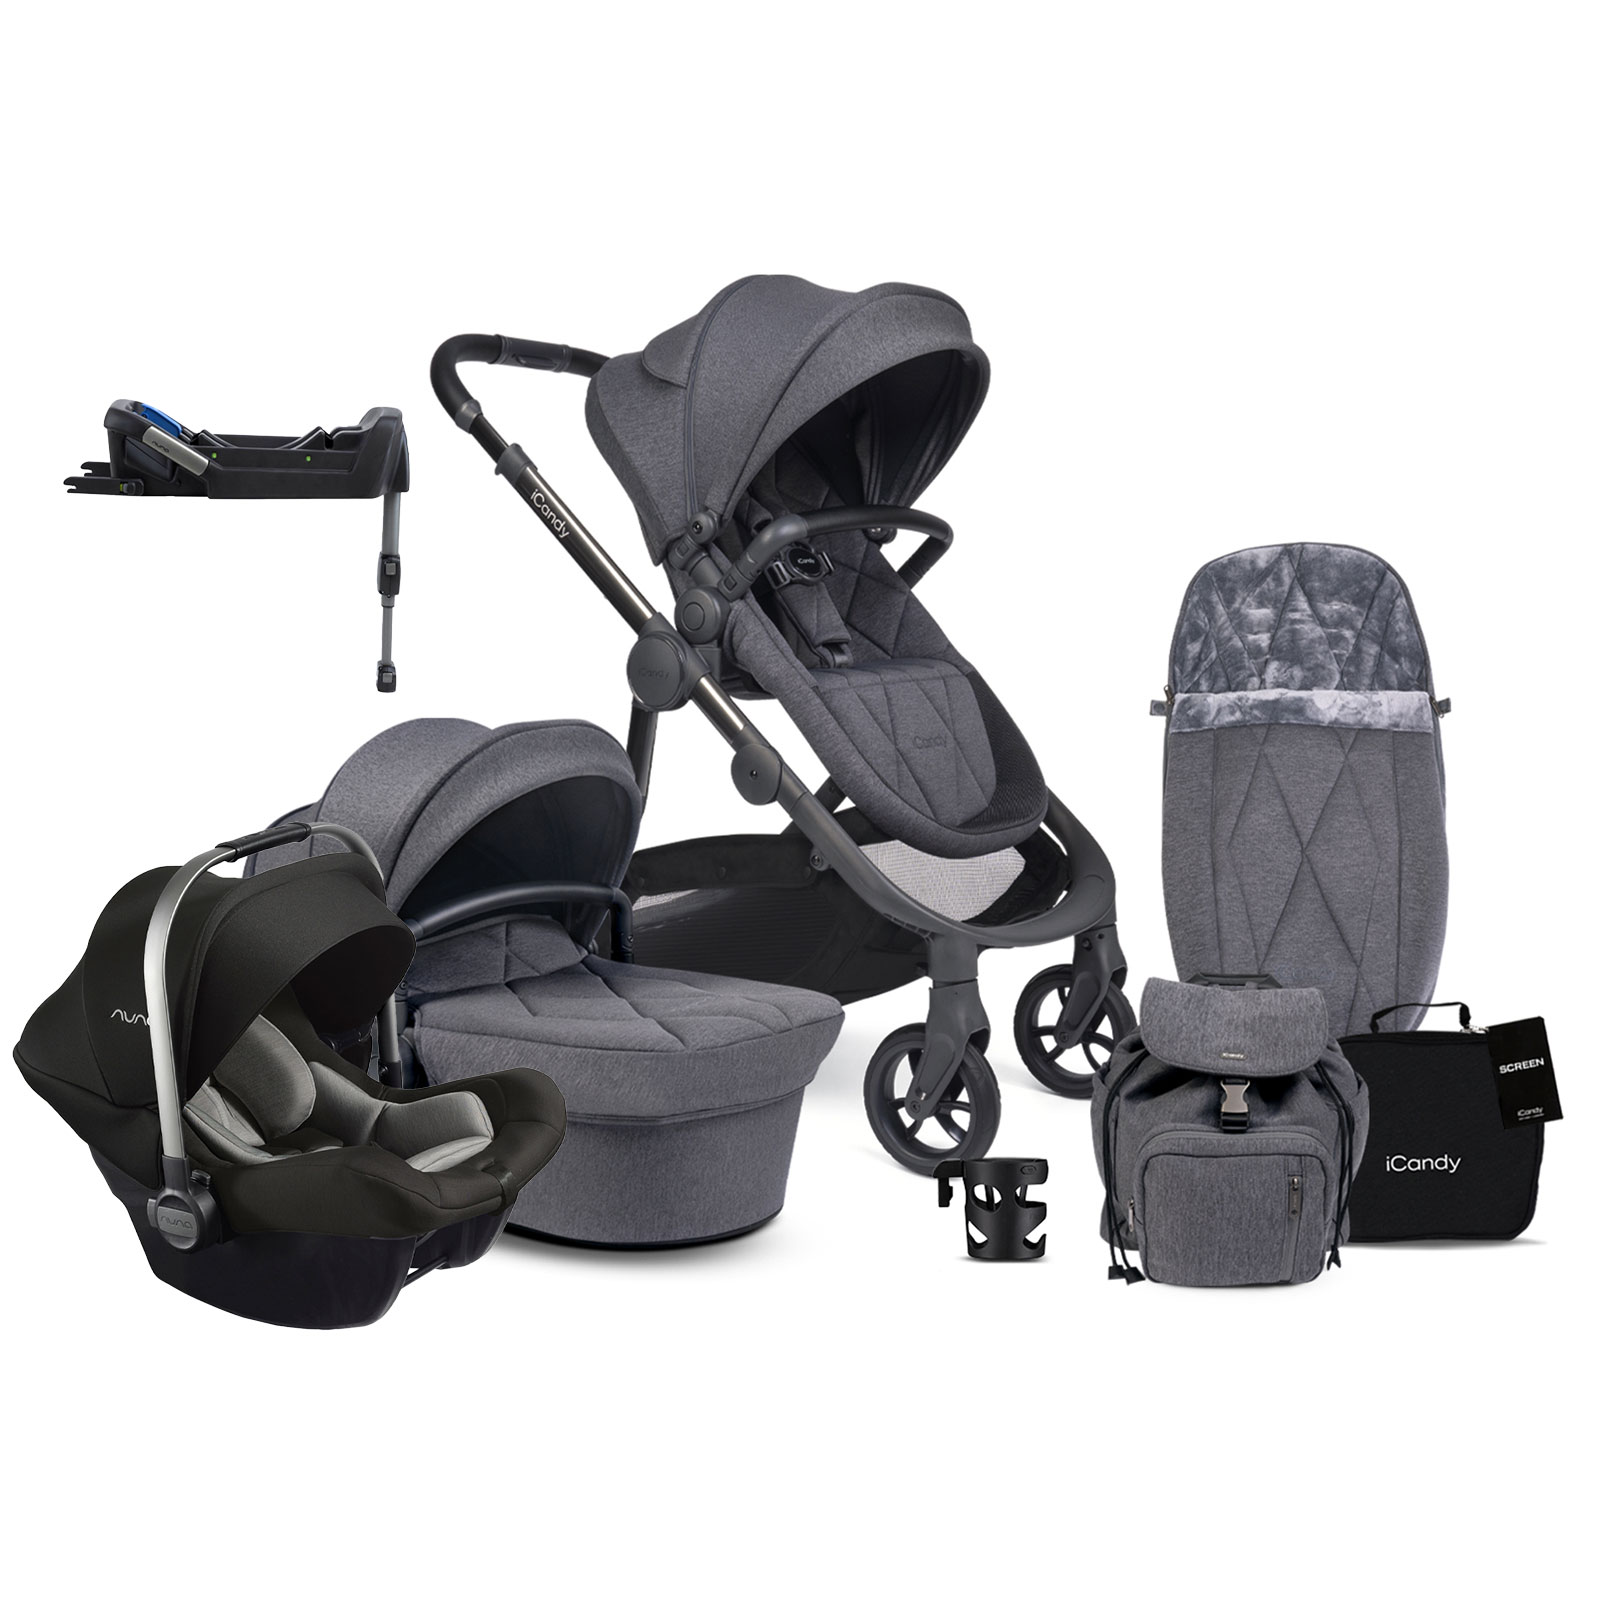 iCandy Orange 3 Carrycot & Pushchair Complete Bundle with Pipa Lite LX Car Seat - Dark Slate